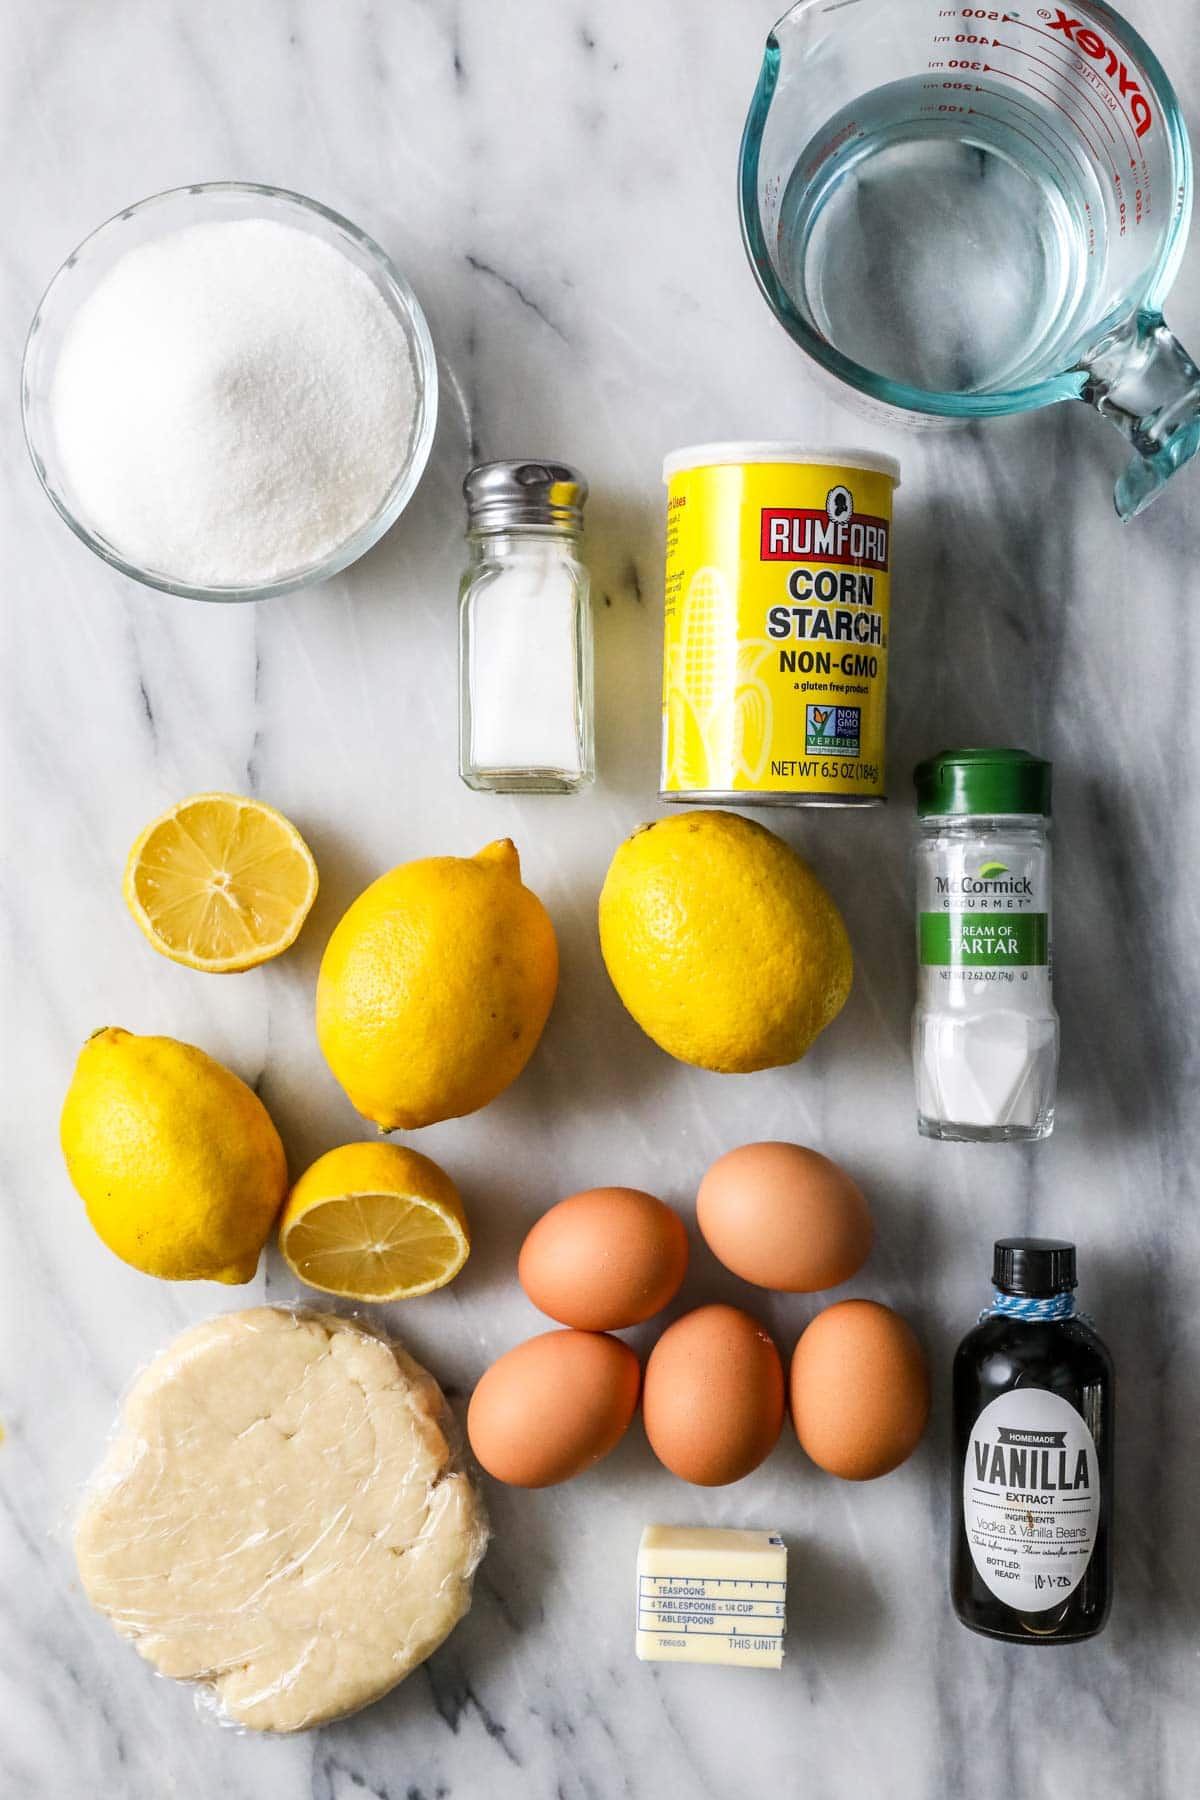 Overhead view of ingredients including lemons, eggs, pie dough, and more.